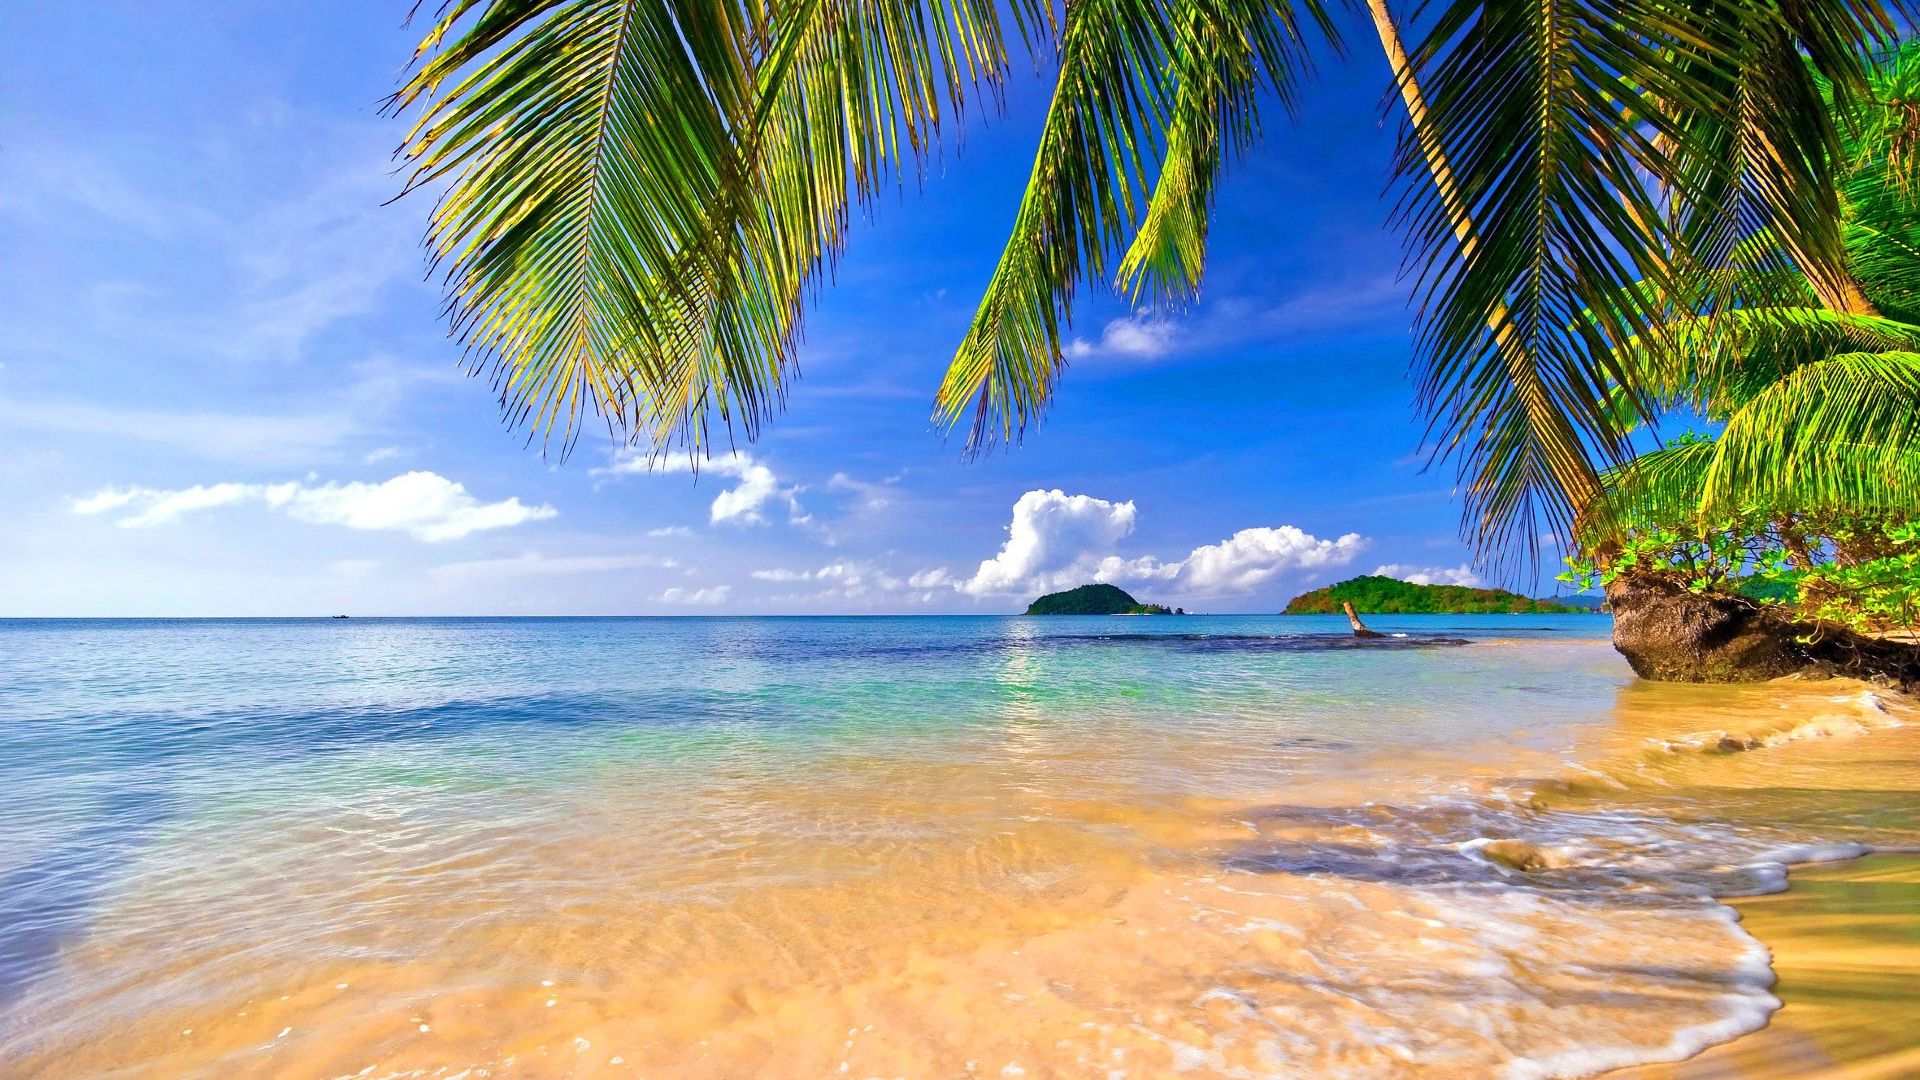 Desktop Wallpaper Palm Tree And Beach, Hd Image, Picture, Background